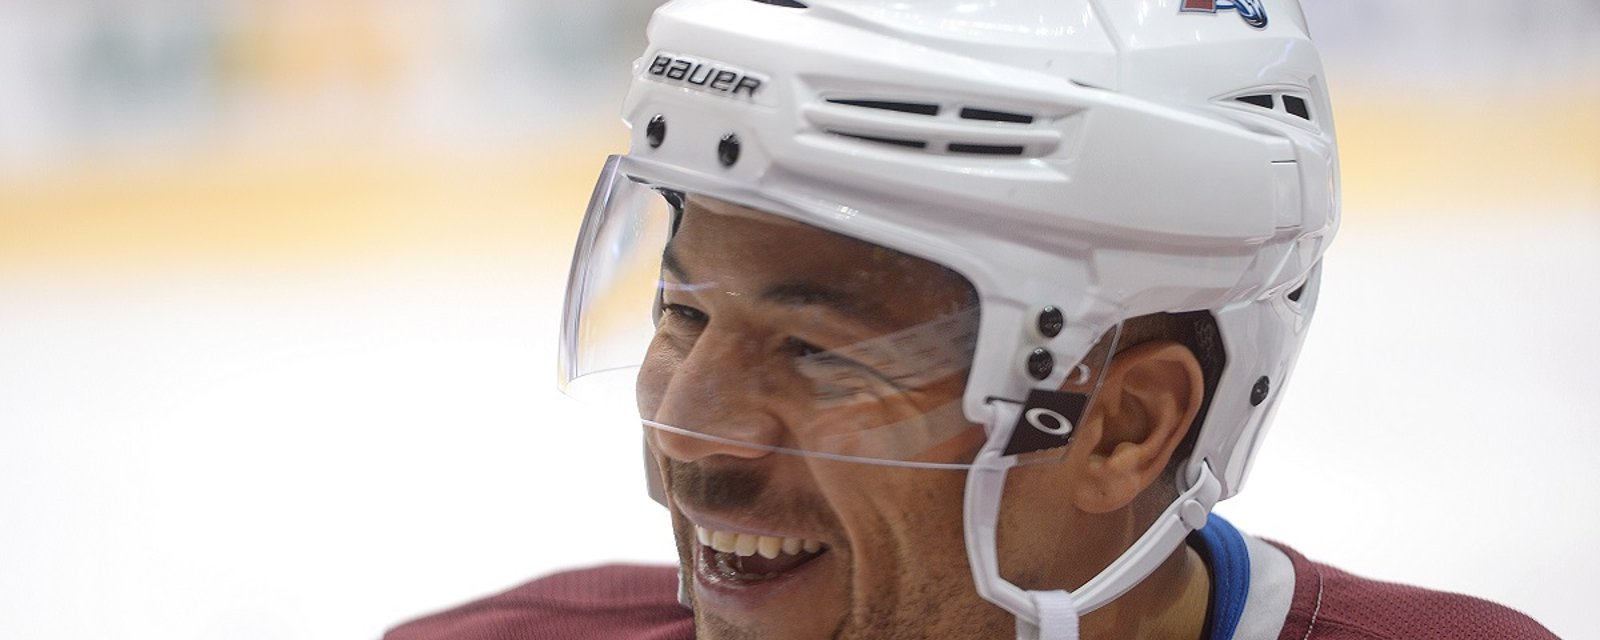 Breaking: Great news from Iginla's agent. 